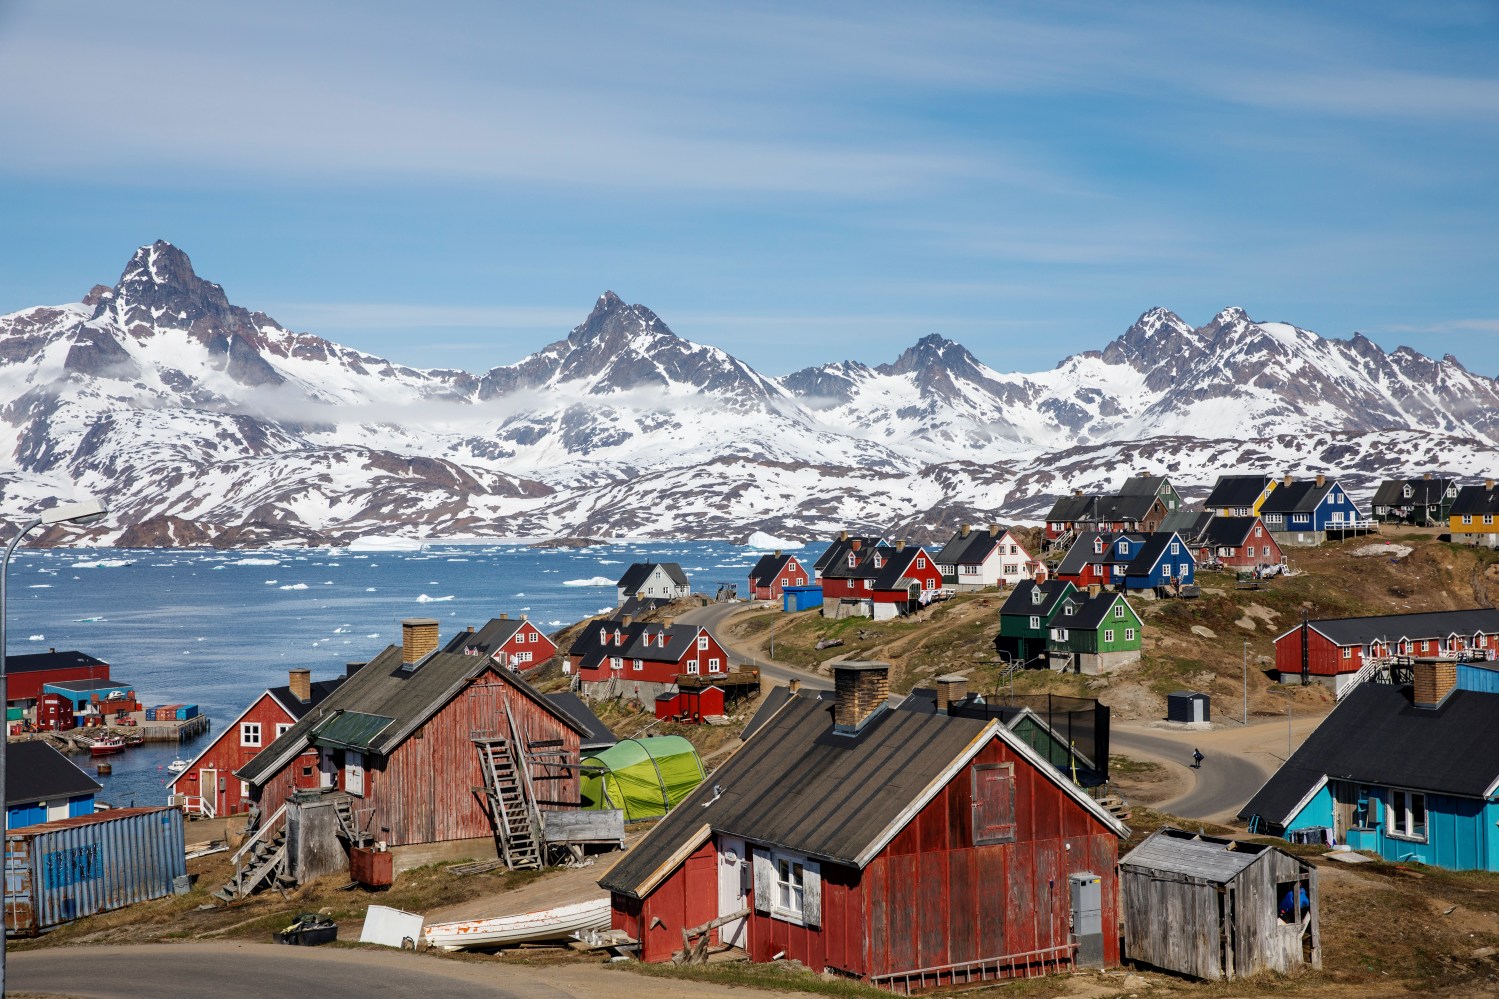 Snow covered mountains rise above the harbour and town of Tasiilaq, Greenland, June 15, 2018. REUTERS/Lucas Jackson  SEARCH "JACKSON TASIILAQ" FOR THIS STORY. SEARCH "WIDER IMAGE" FOR ALL STORIES. - RC1247ABC2C0